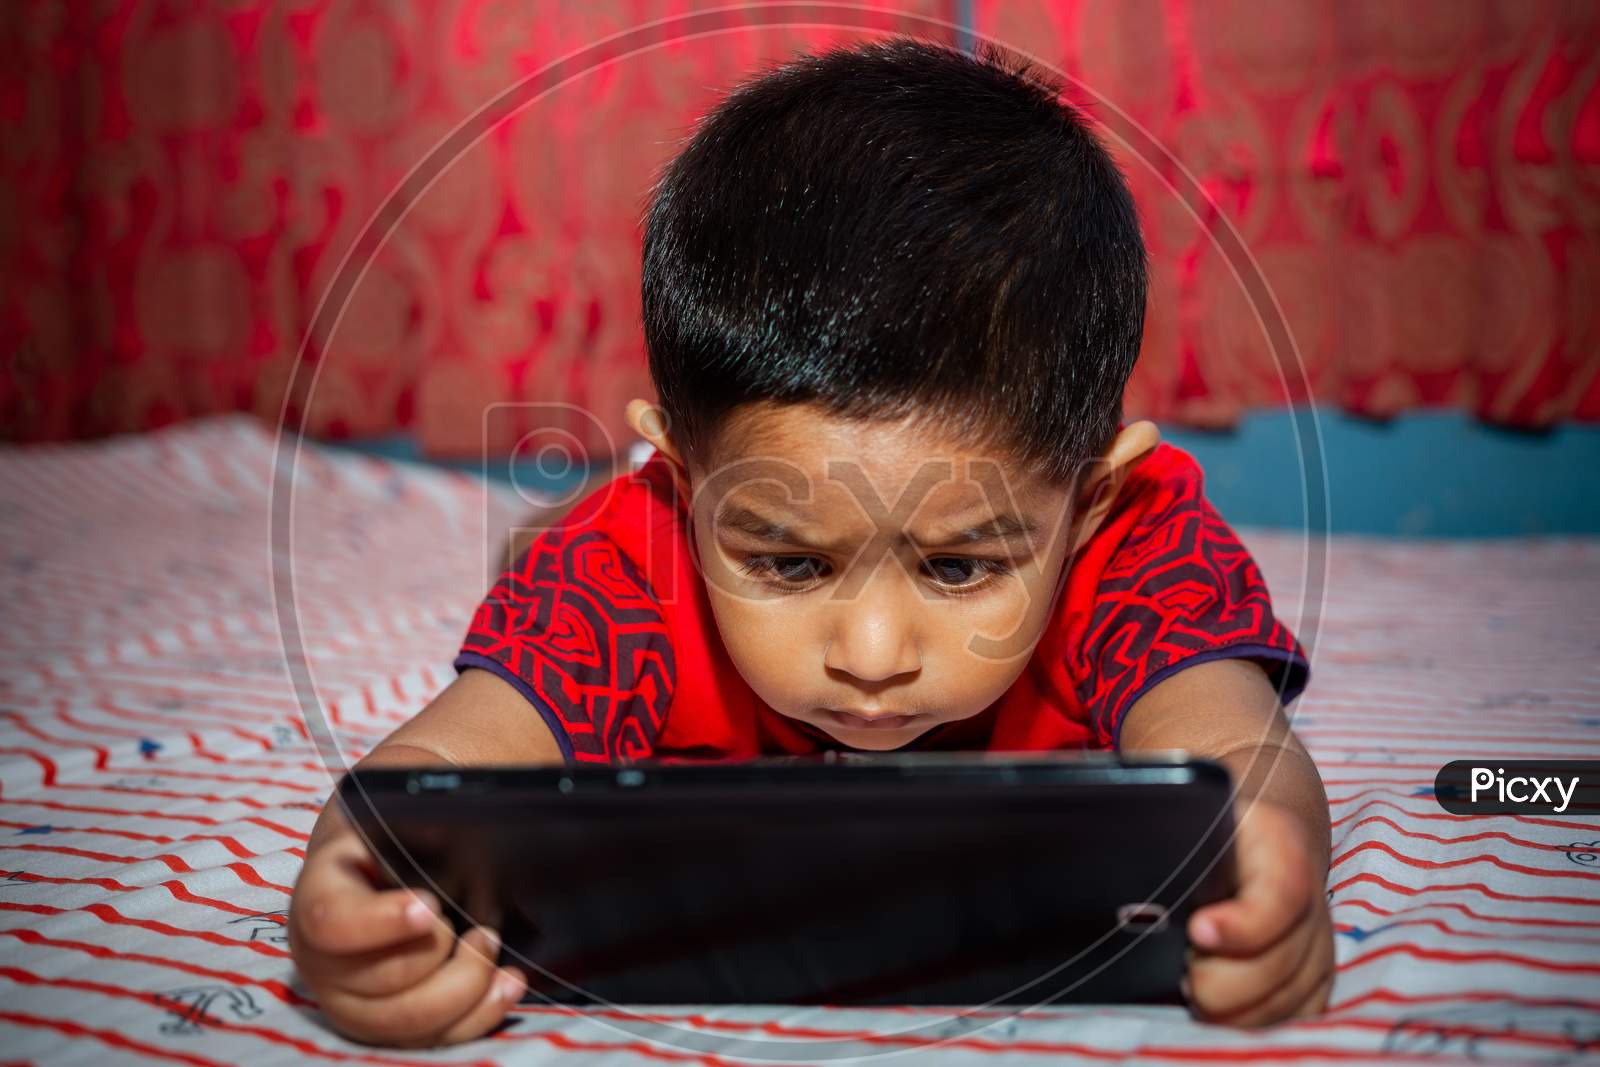 A Child With Full Attention On His Bed Watching Cartoons Using The Tab Smartphone. Kids Playing With Smartphone. Mobile Phone And Internet Addiction Concept.